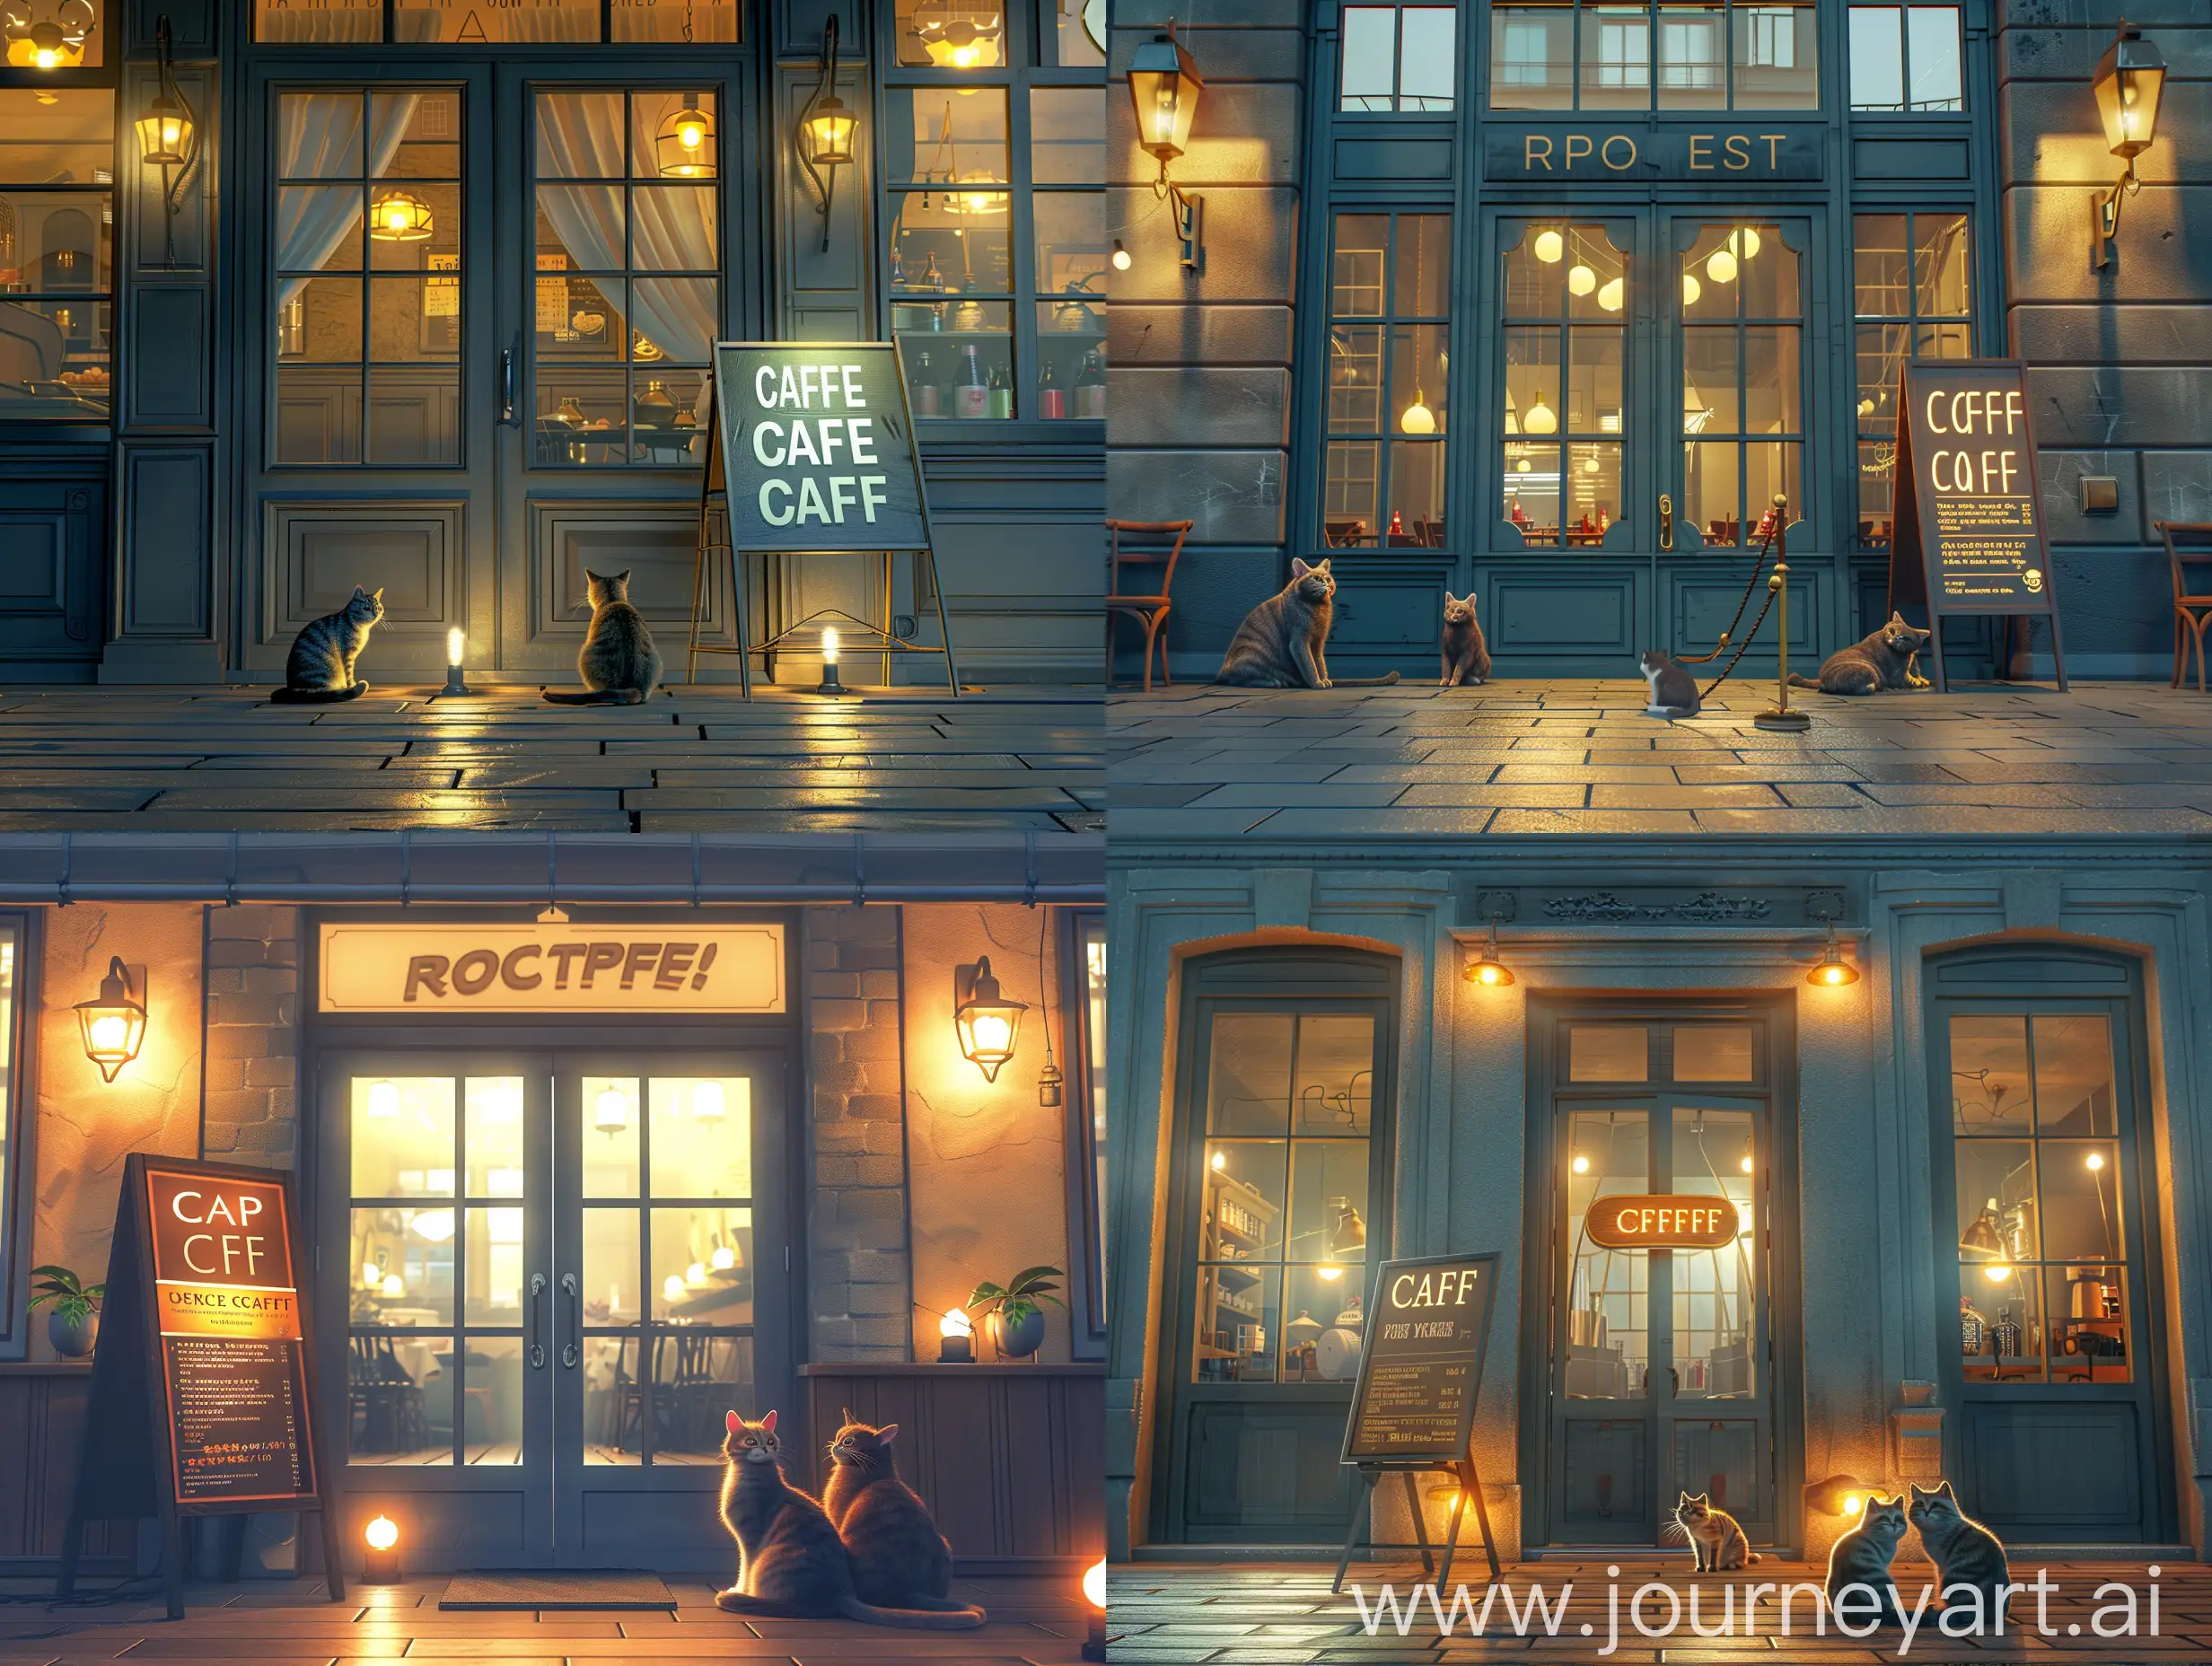 Cafe facade, front view, large announcement of the opening of this cafe on an advertising board that stands on the floor two cats are sitting next to the door, lights are on in the windows, photorealistic scene, kind atmosphere, not blurry